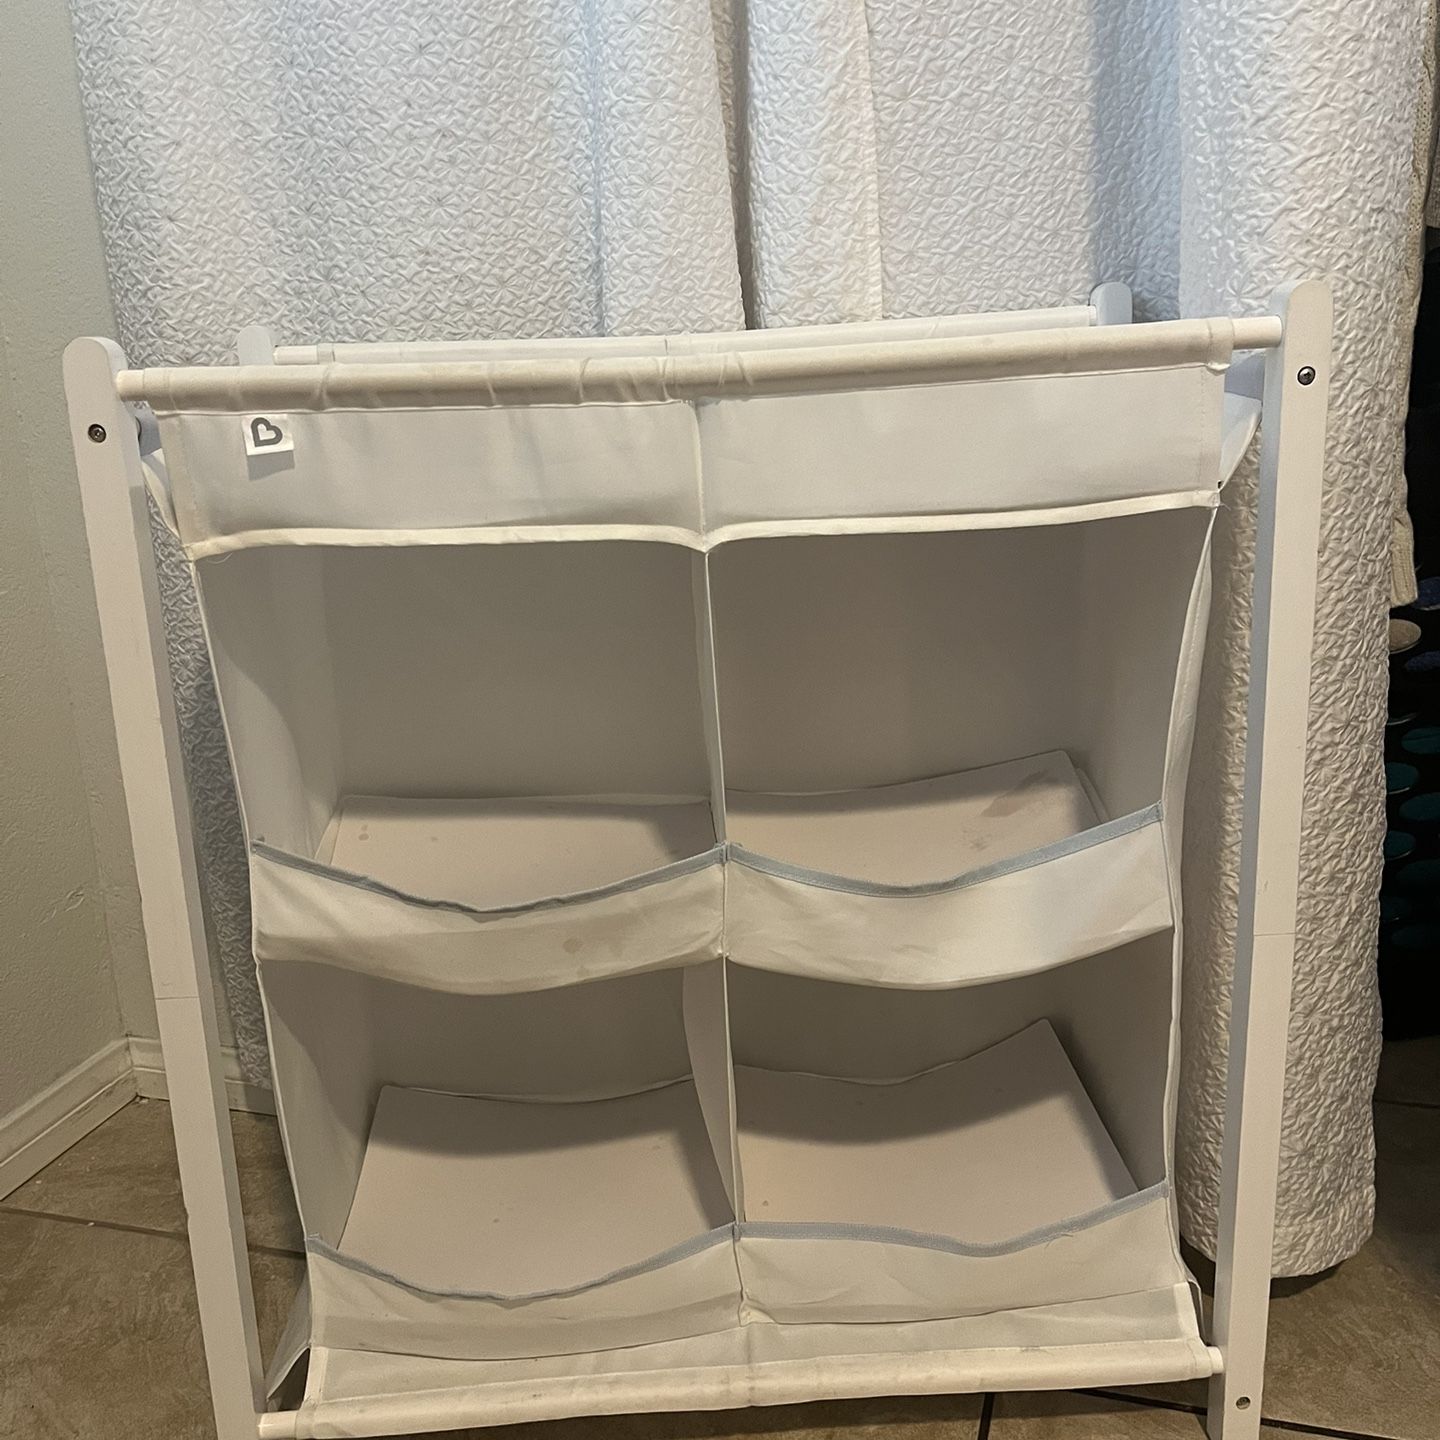 New] Munchkin Baby Food Organizer for Sale in Long Beach, CA - OfferUp